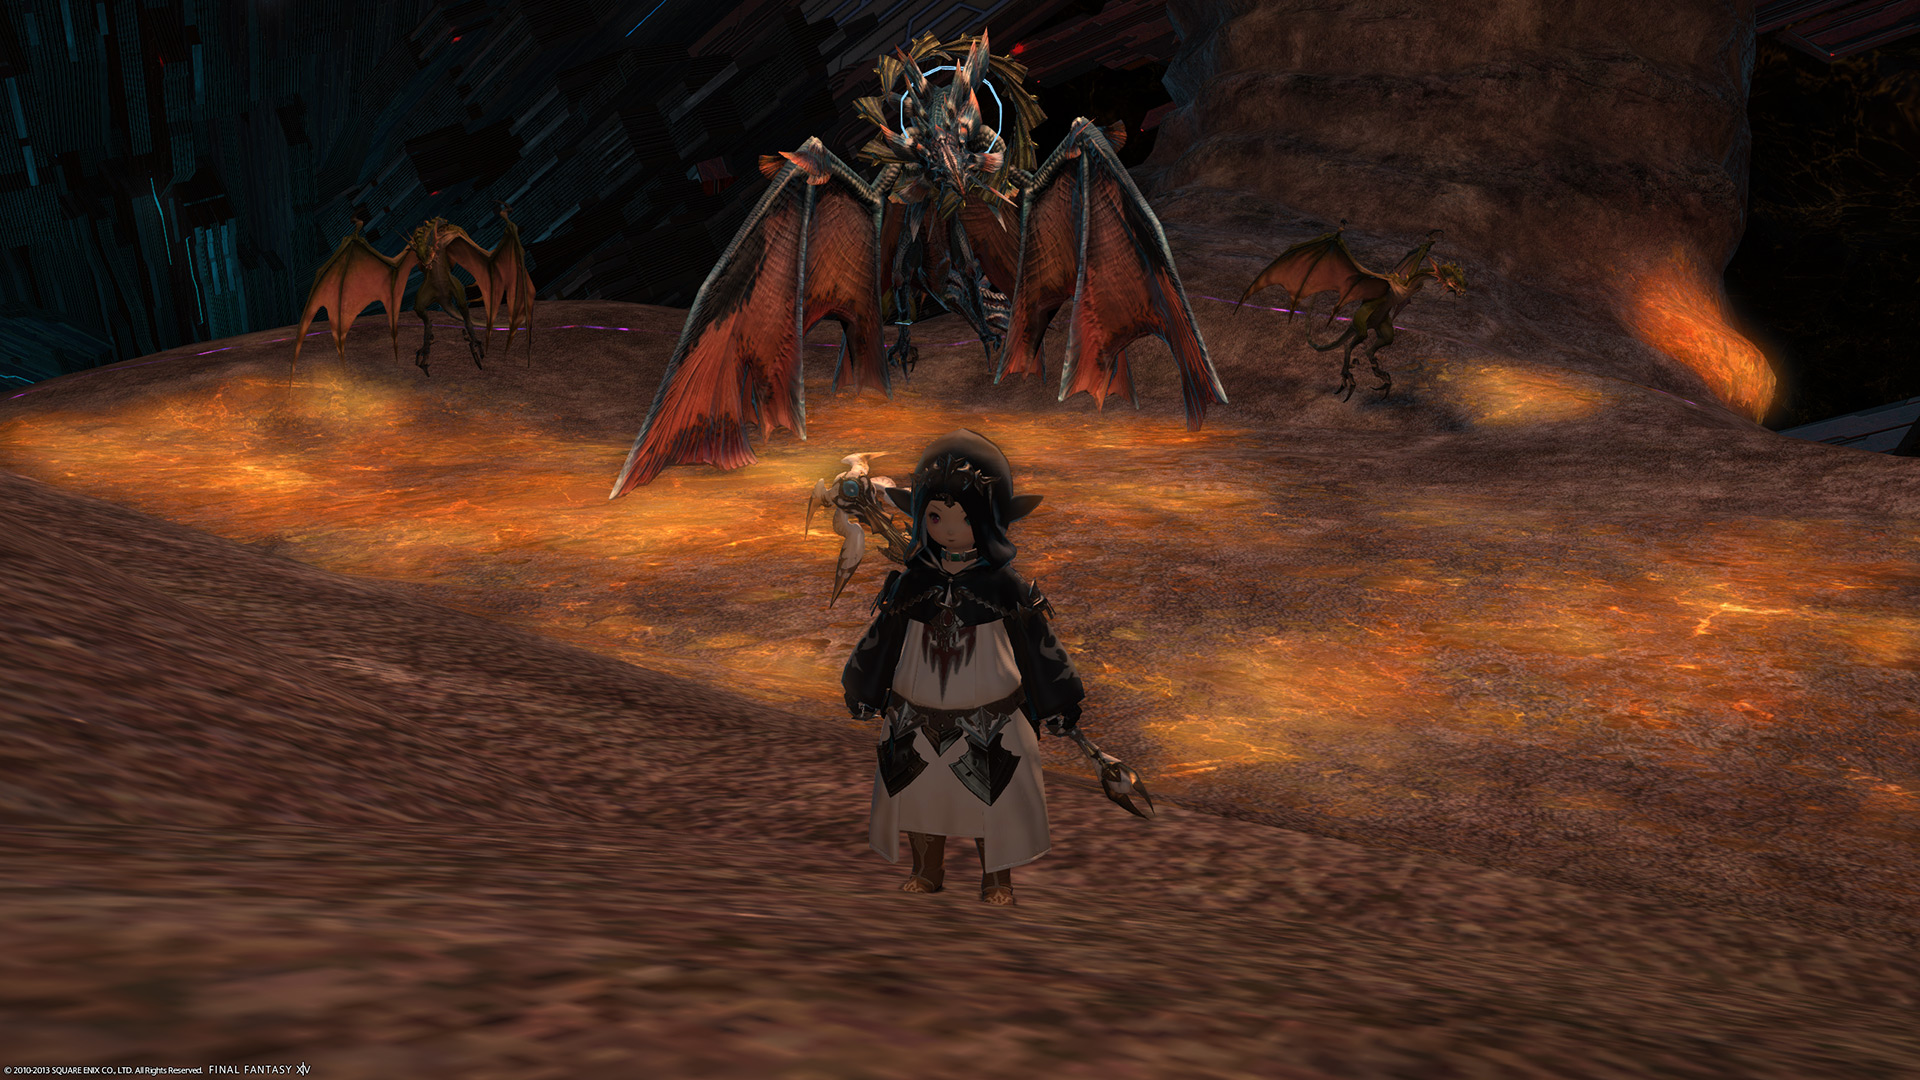 Twintania caused me to quit Final Fantasy XIV: A Realm Reborn